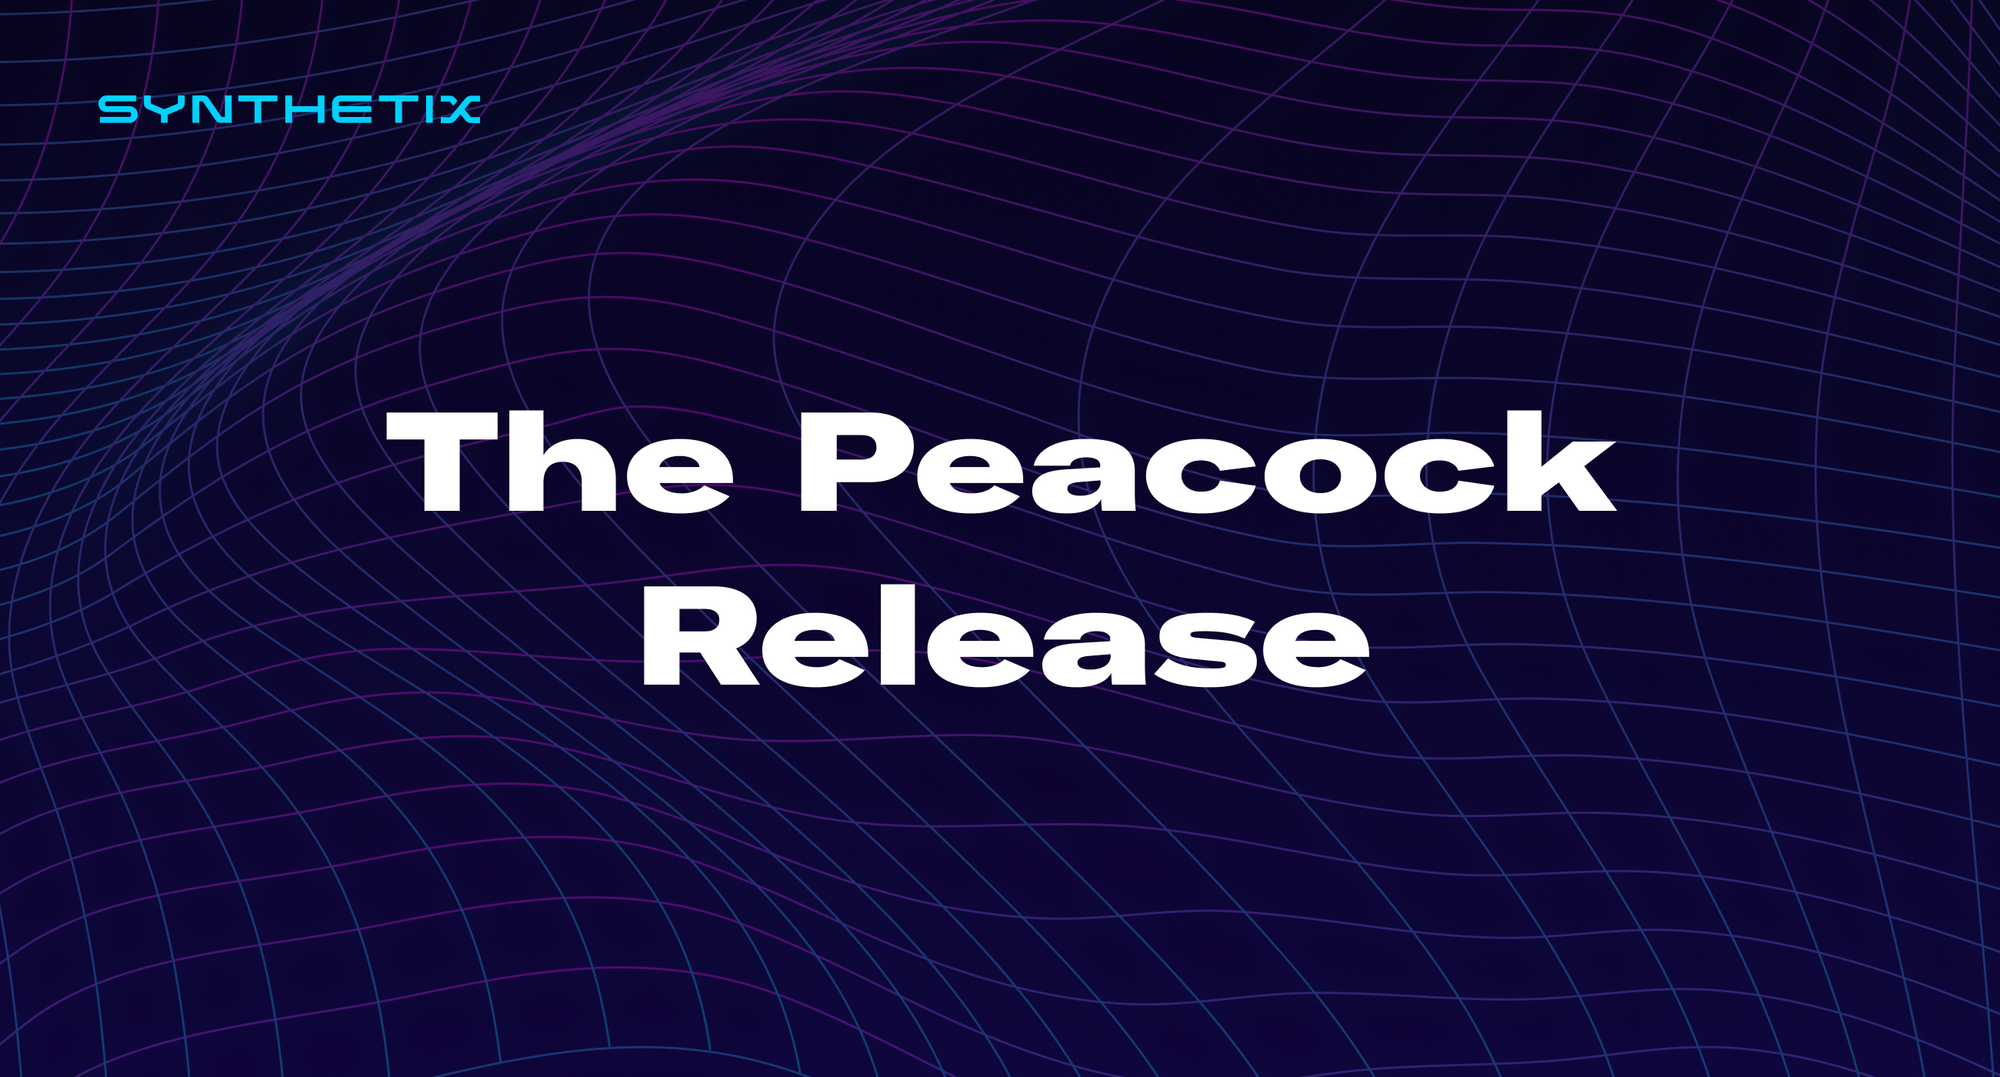 The Peacock Release